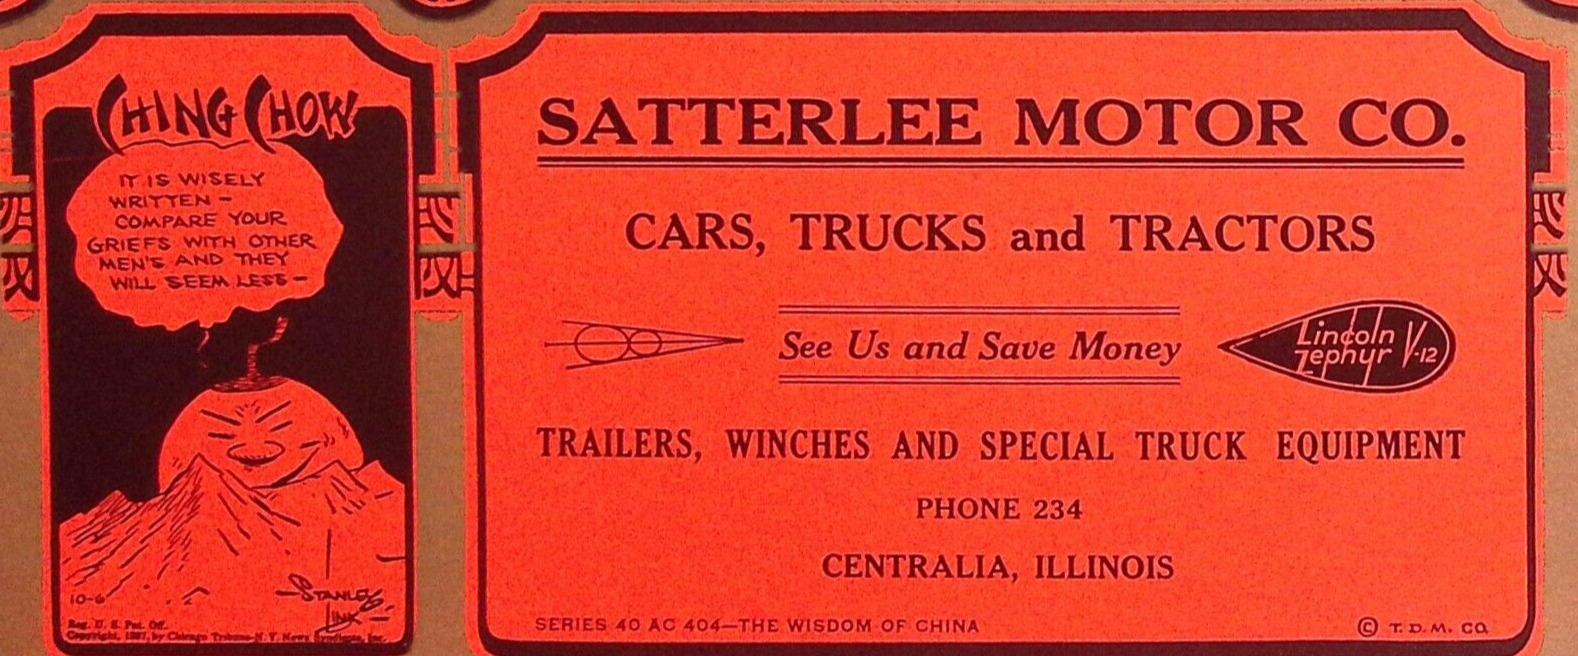 1937 CENTRALIA IL SATTERLEE MOTOR CO CHING CHOW WISDOM OF CHINA INK BLOTTER Z205